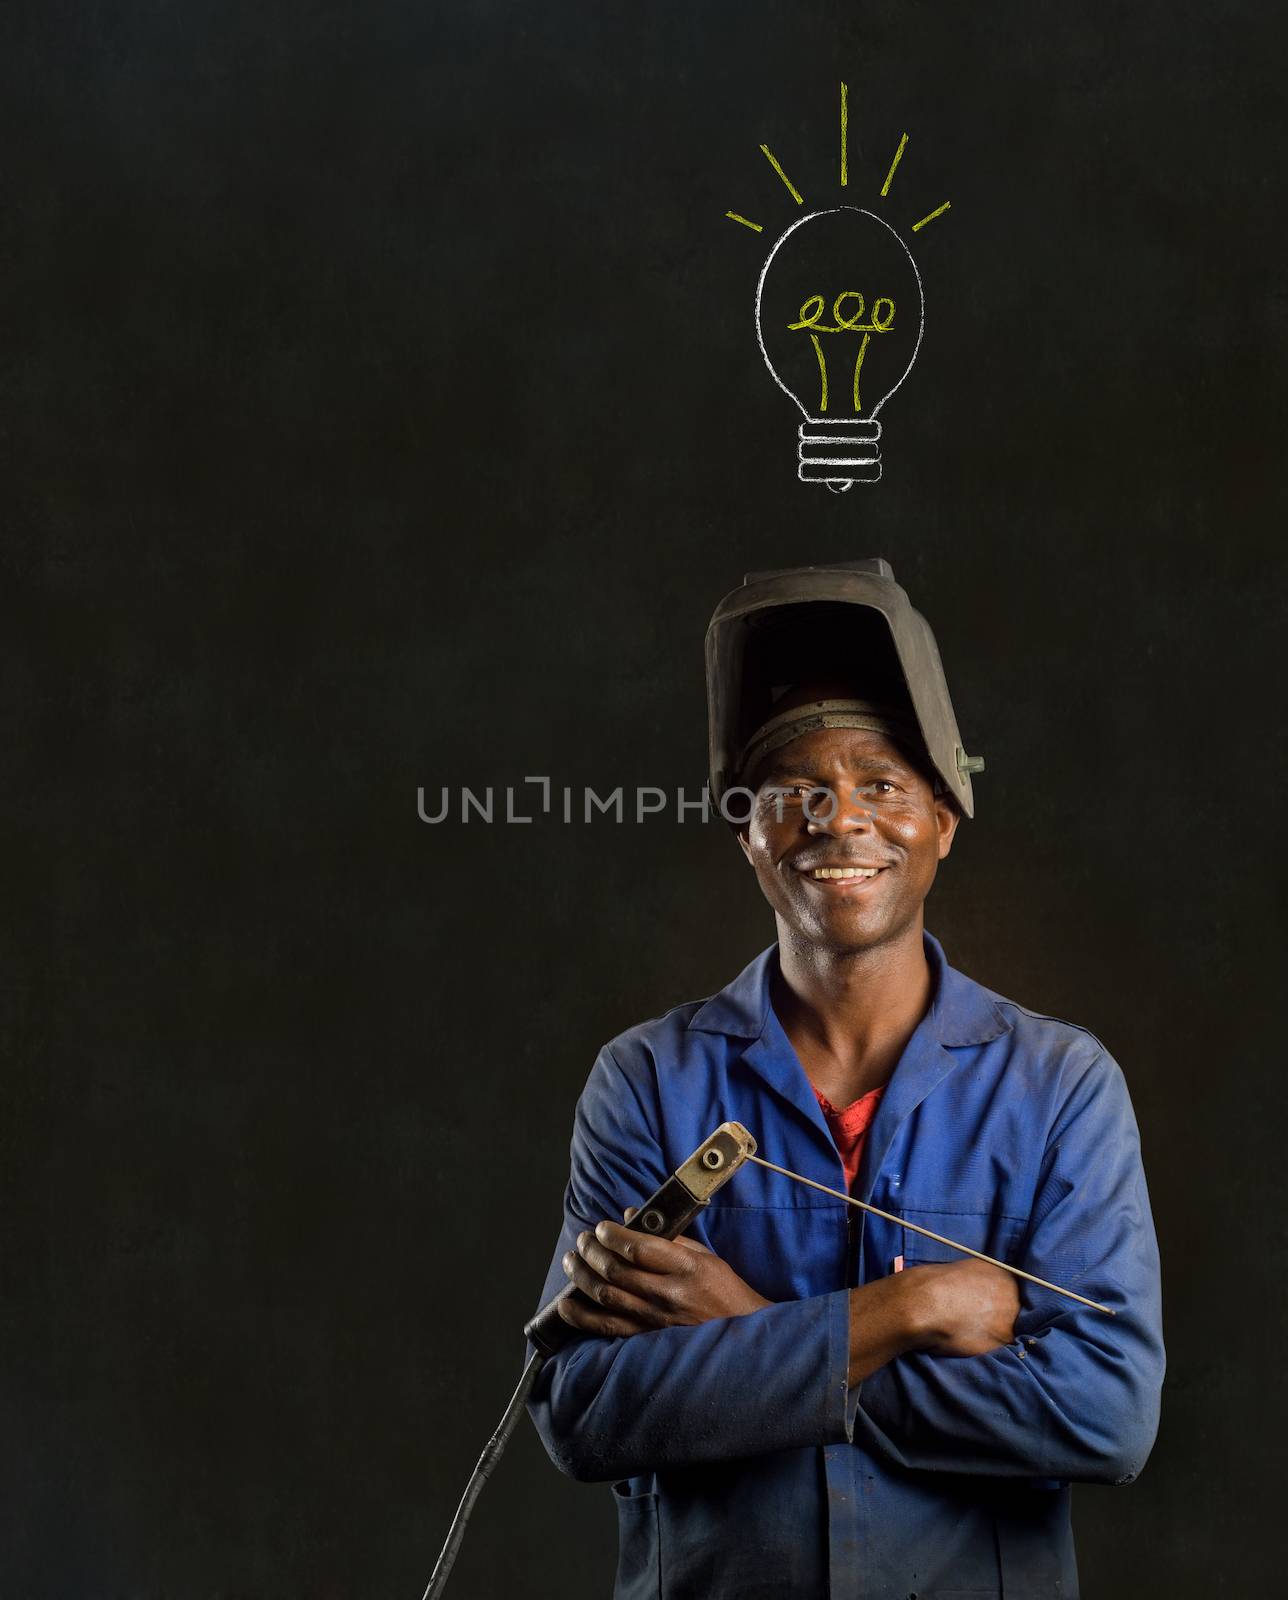 African American black man industrial worker with chalk light bulb on a blackboard background